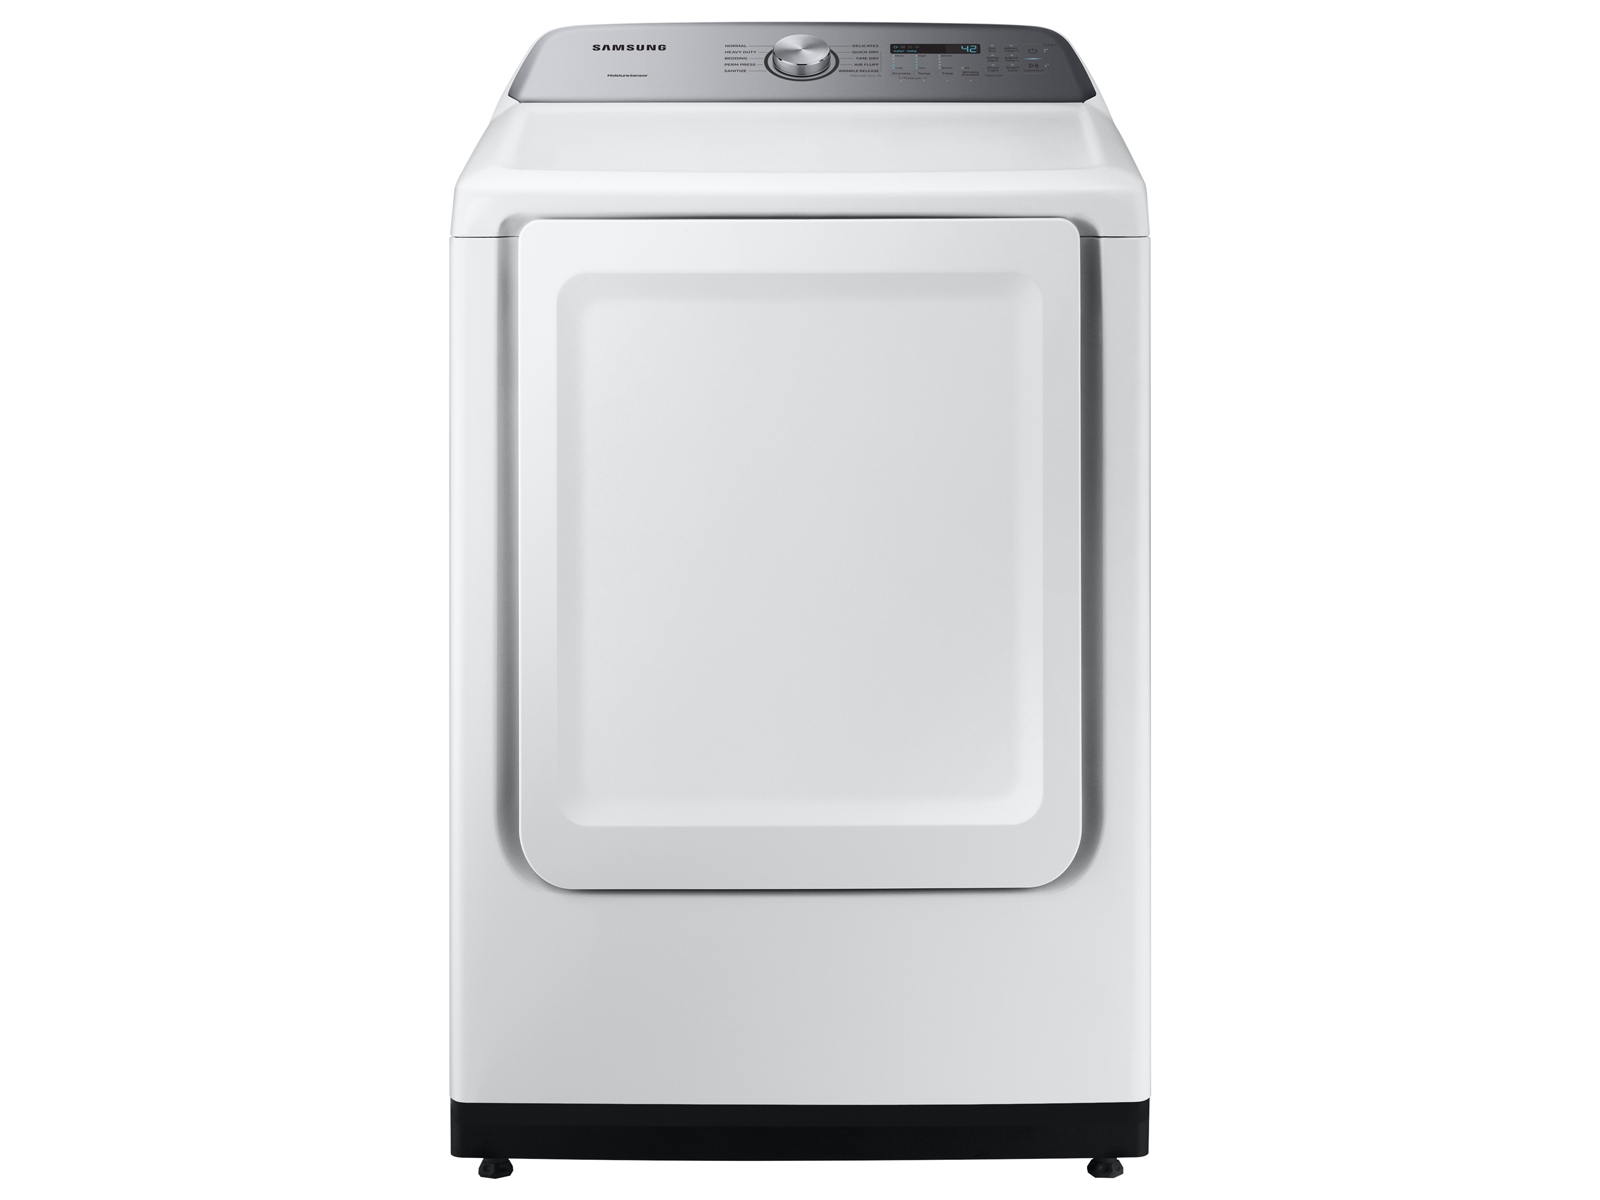 Samsung 7.4 cu. ft. Electric Dryer with Sensor Dry in White(DVE50R5200W/A3)